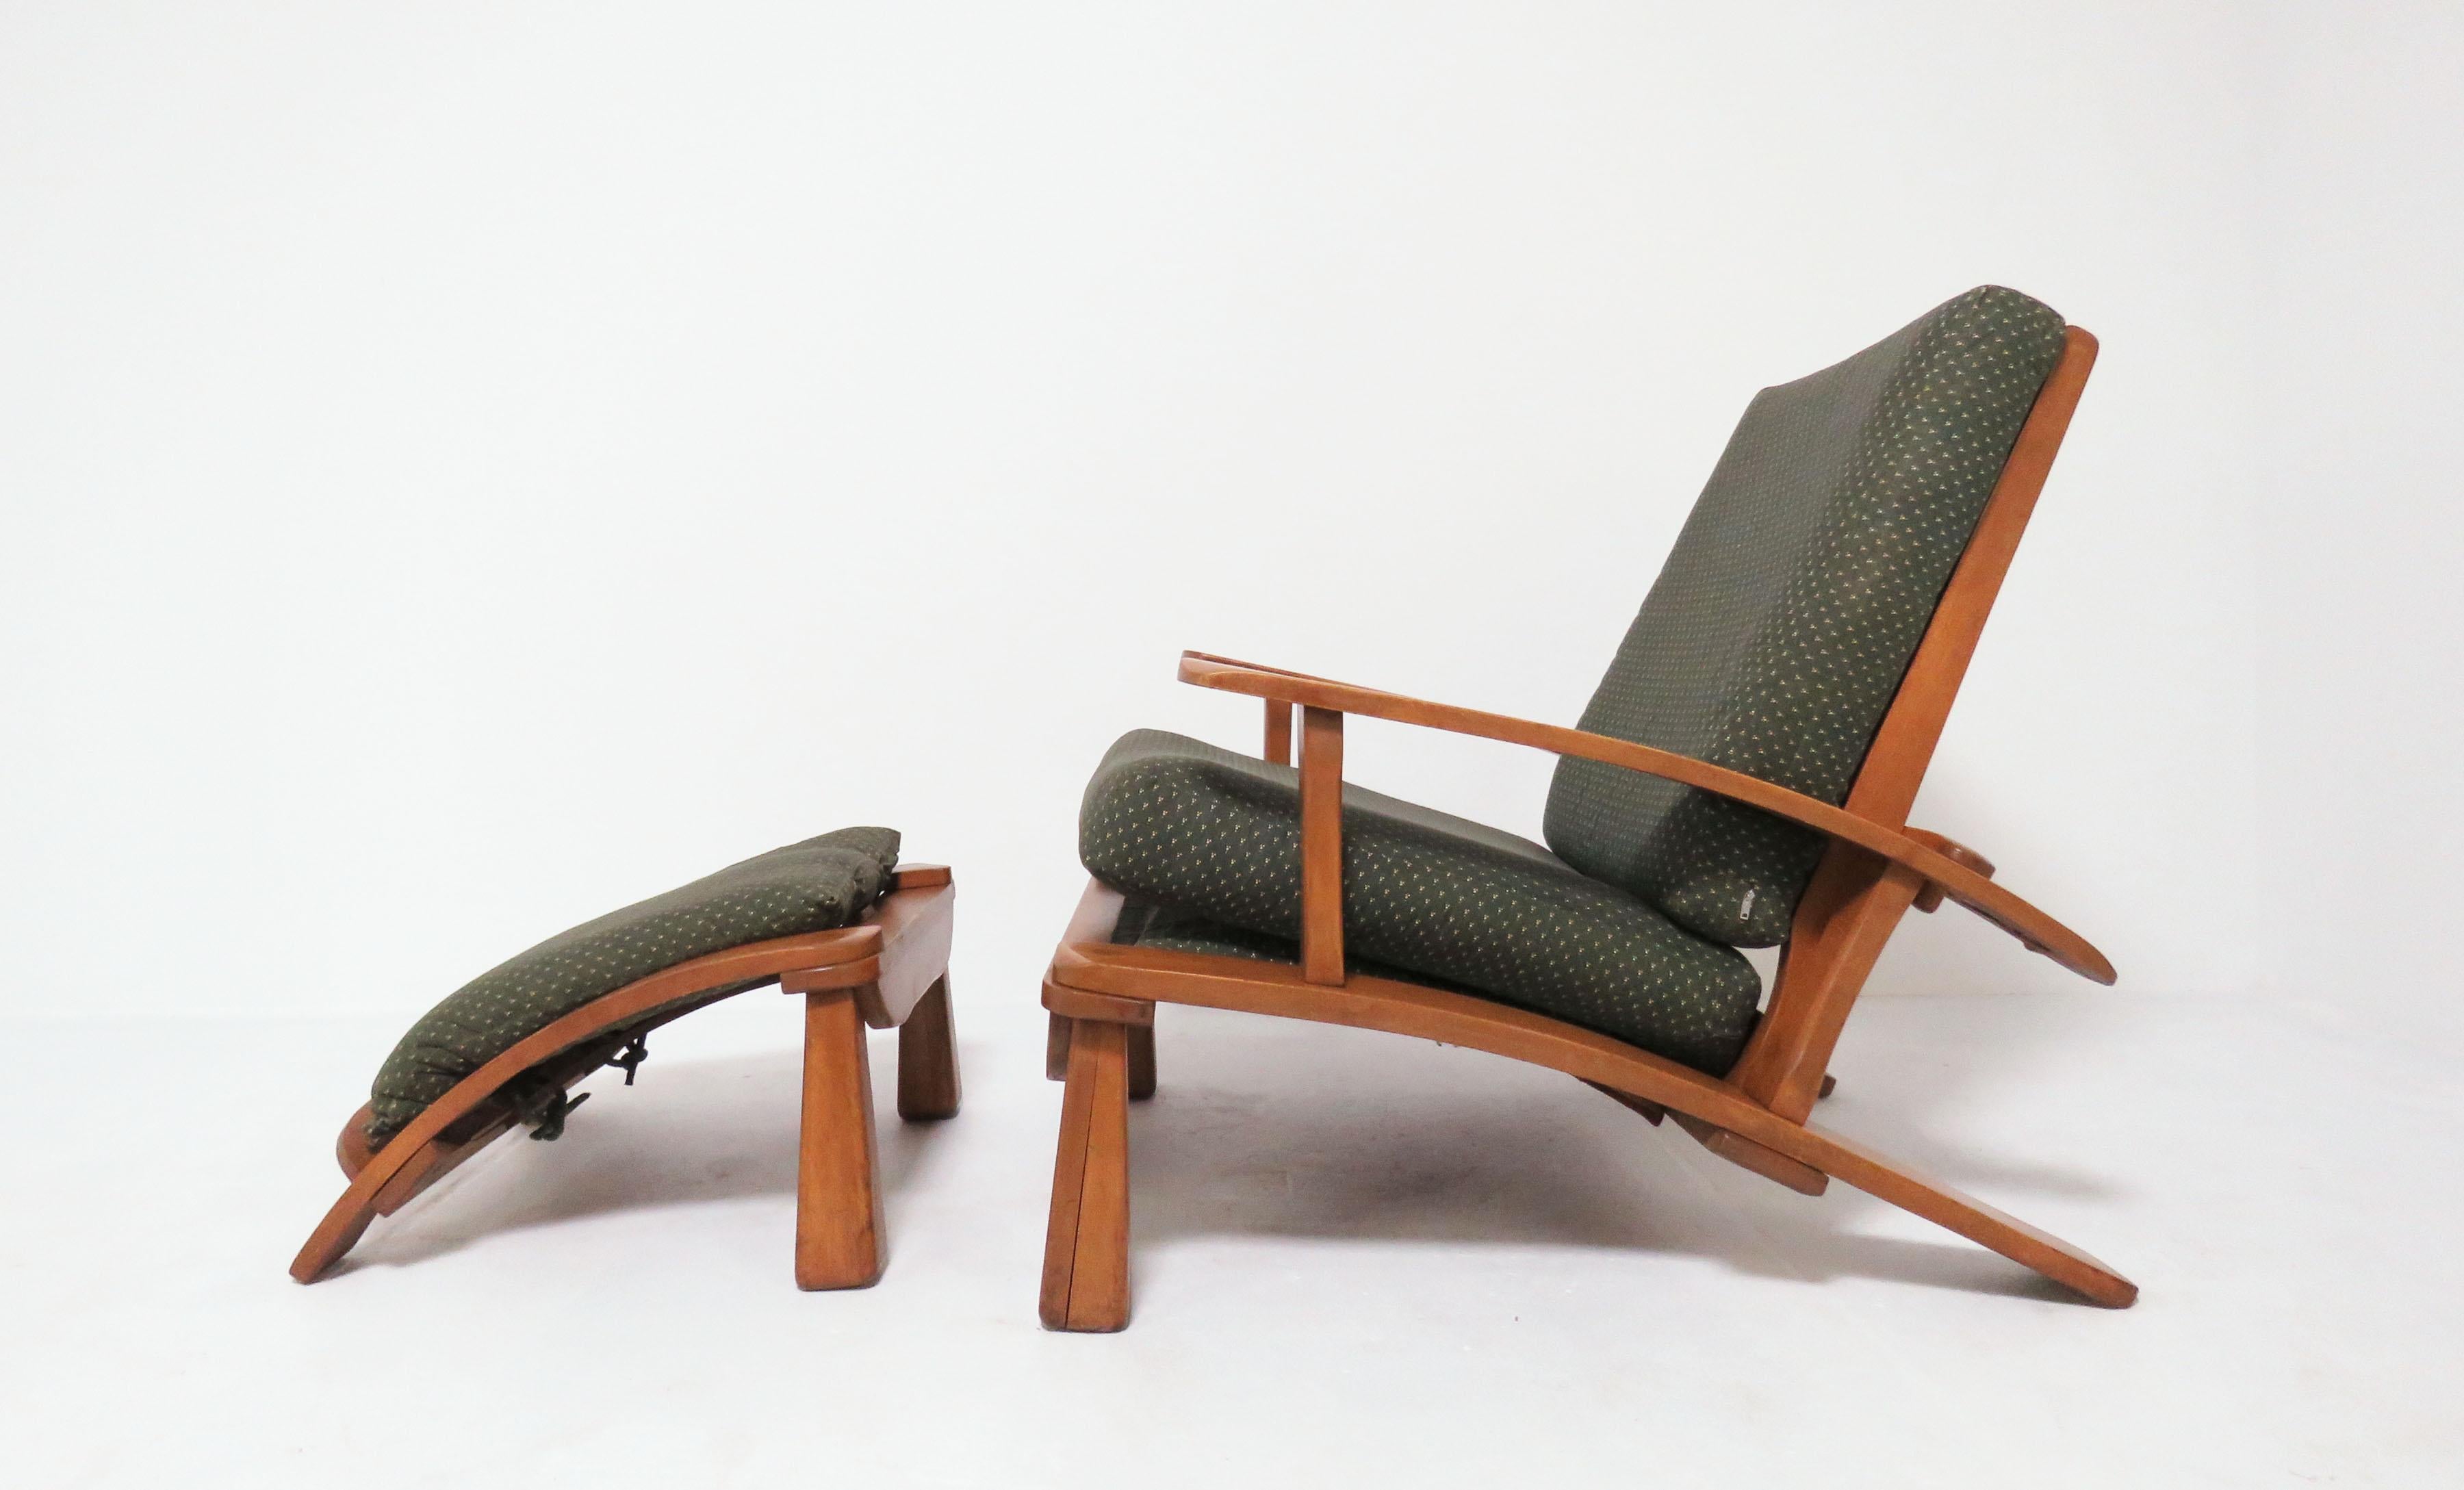 Rare Morris (reclining) chair and ottoman, designed by Herman DeVries for the H.T. Cushman furniture company of Bennington, Vt. The Cushman company was an early adopter of the modern style and manufactured a distinctly American catalog of solid